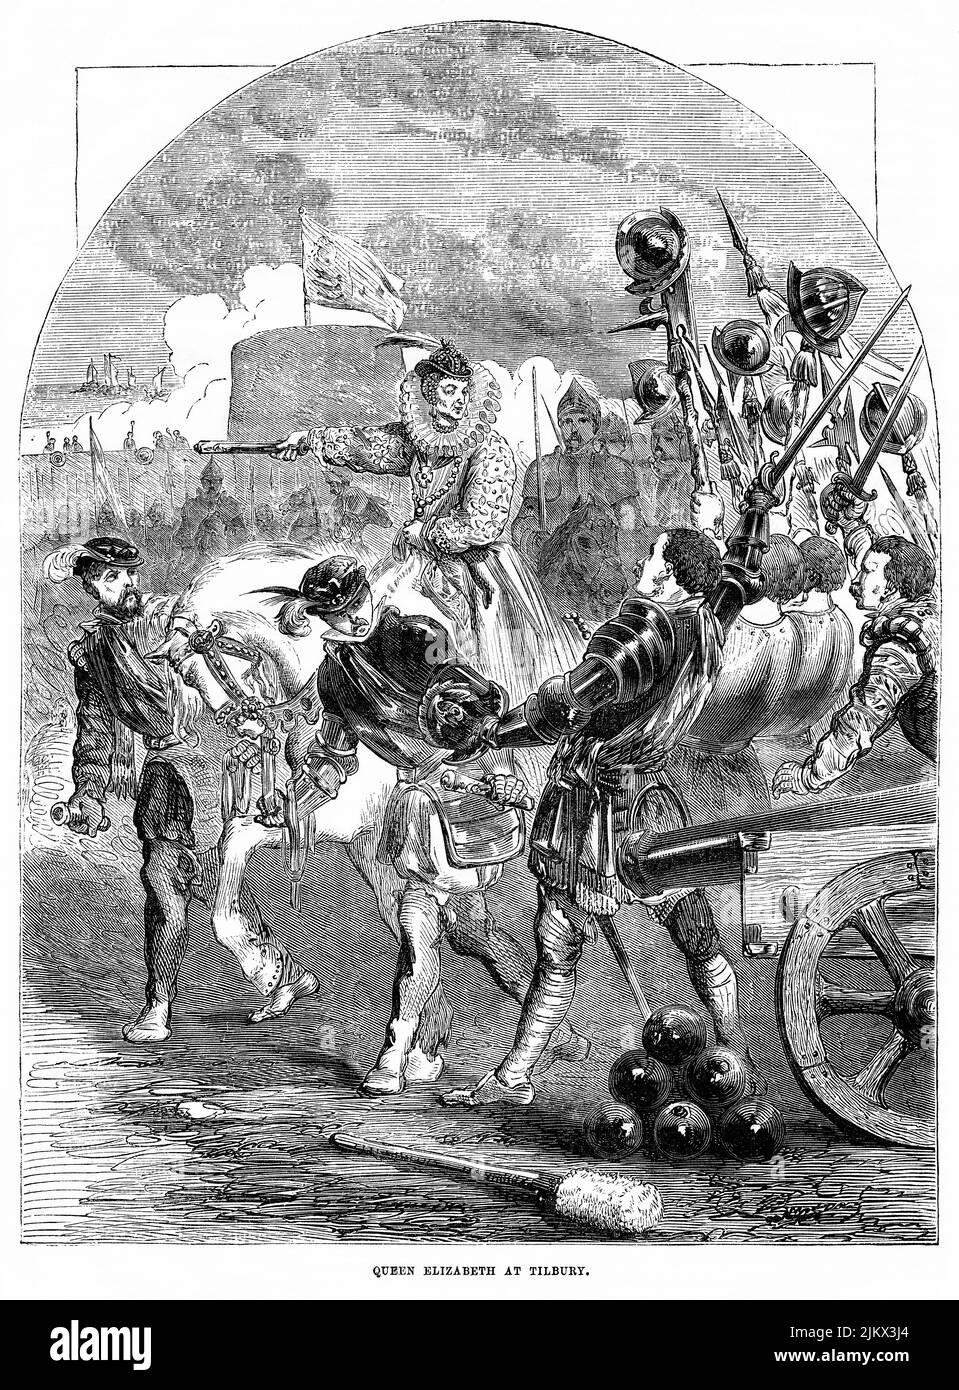 Queen Elizabeth at Tilbury, Illustration from the Book, 'John Cassel’s Illustrated History of England, Volume II', text by William Howitt, Cassell, Petter, and Galpin, London, 1858 Stock Photo